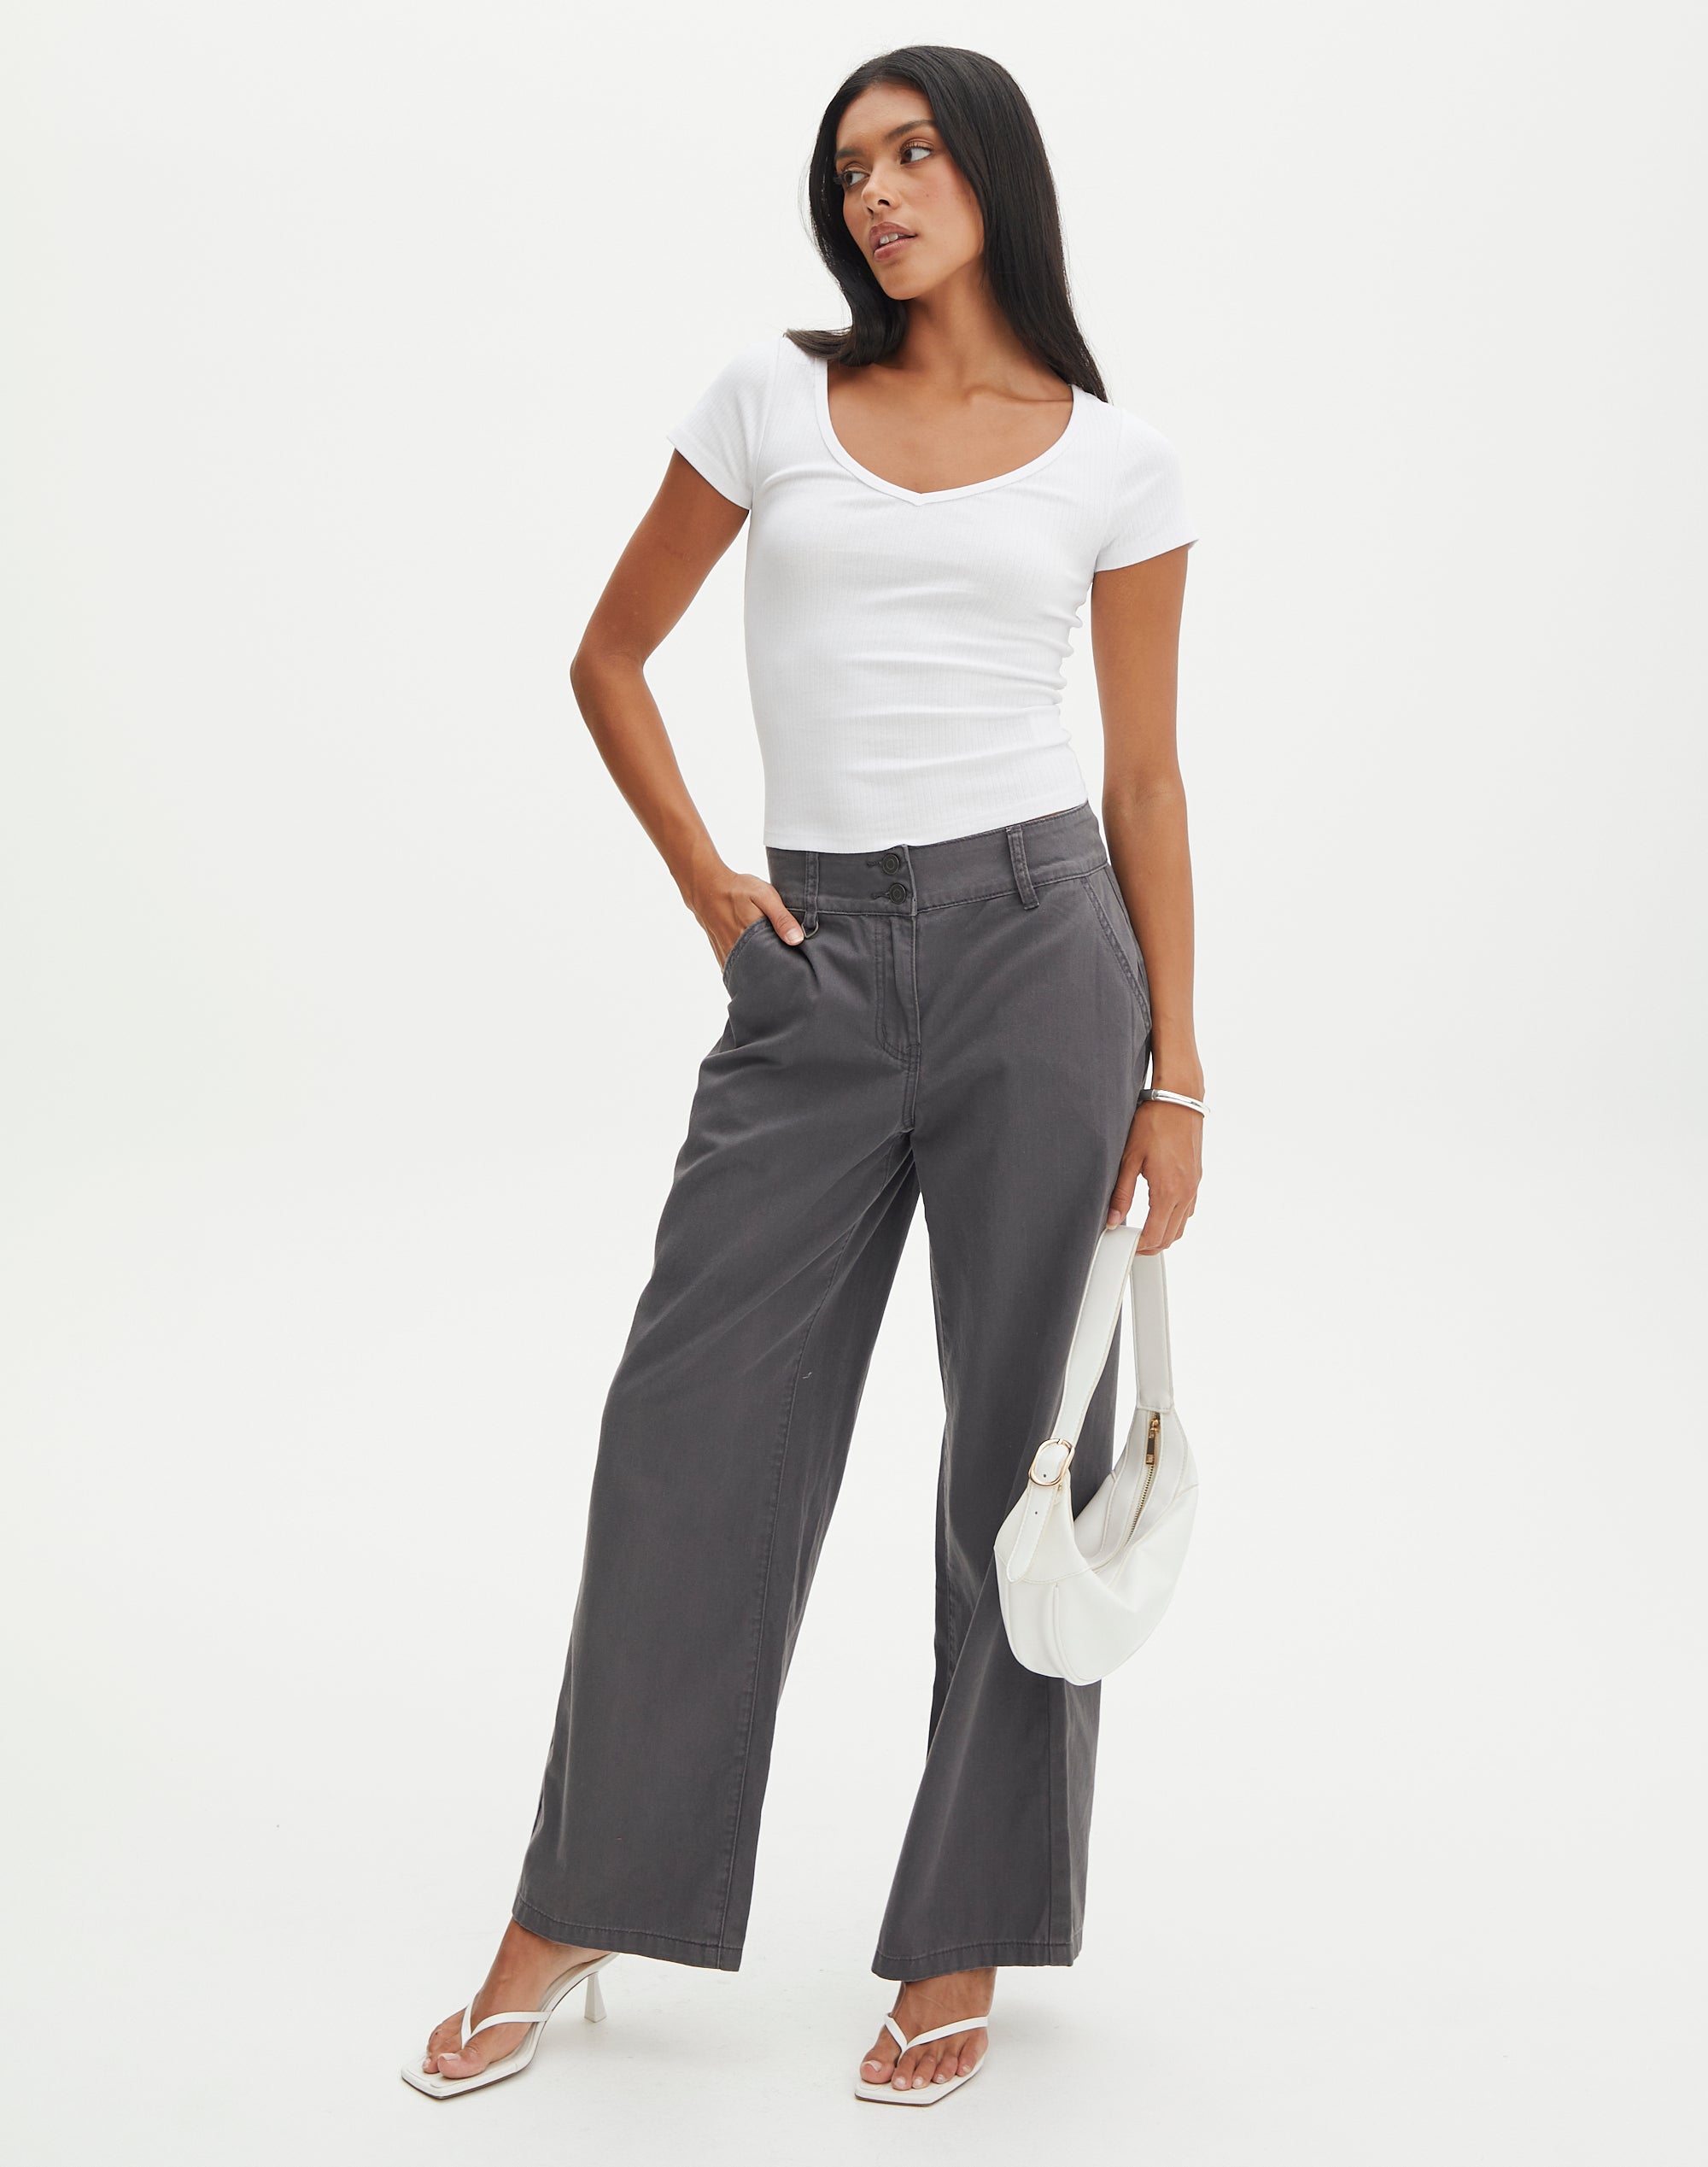 https://www.glassons.com/content/products/libby-mr-utility-pant-shadow-dancer-front-pw132288cot.jpg